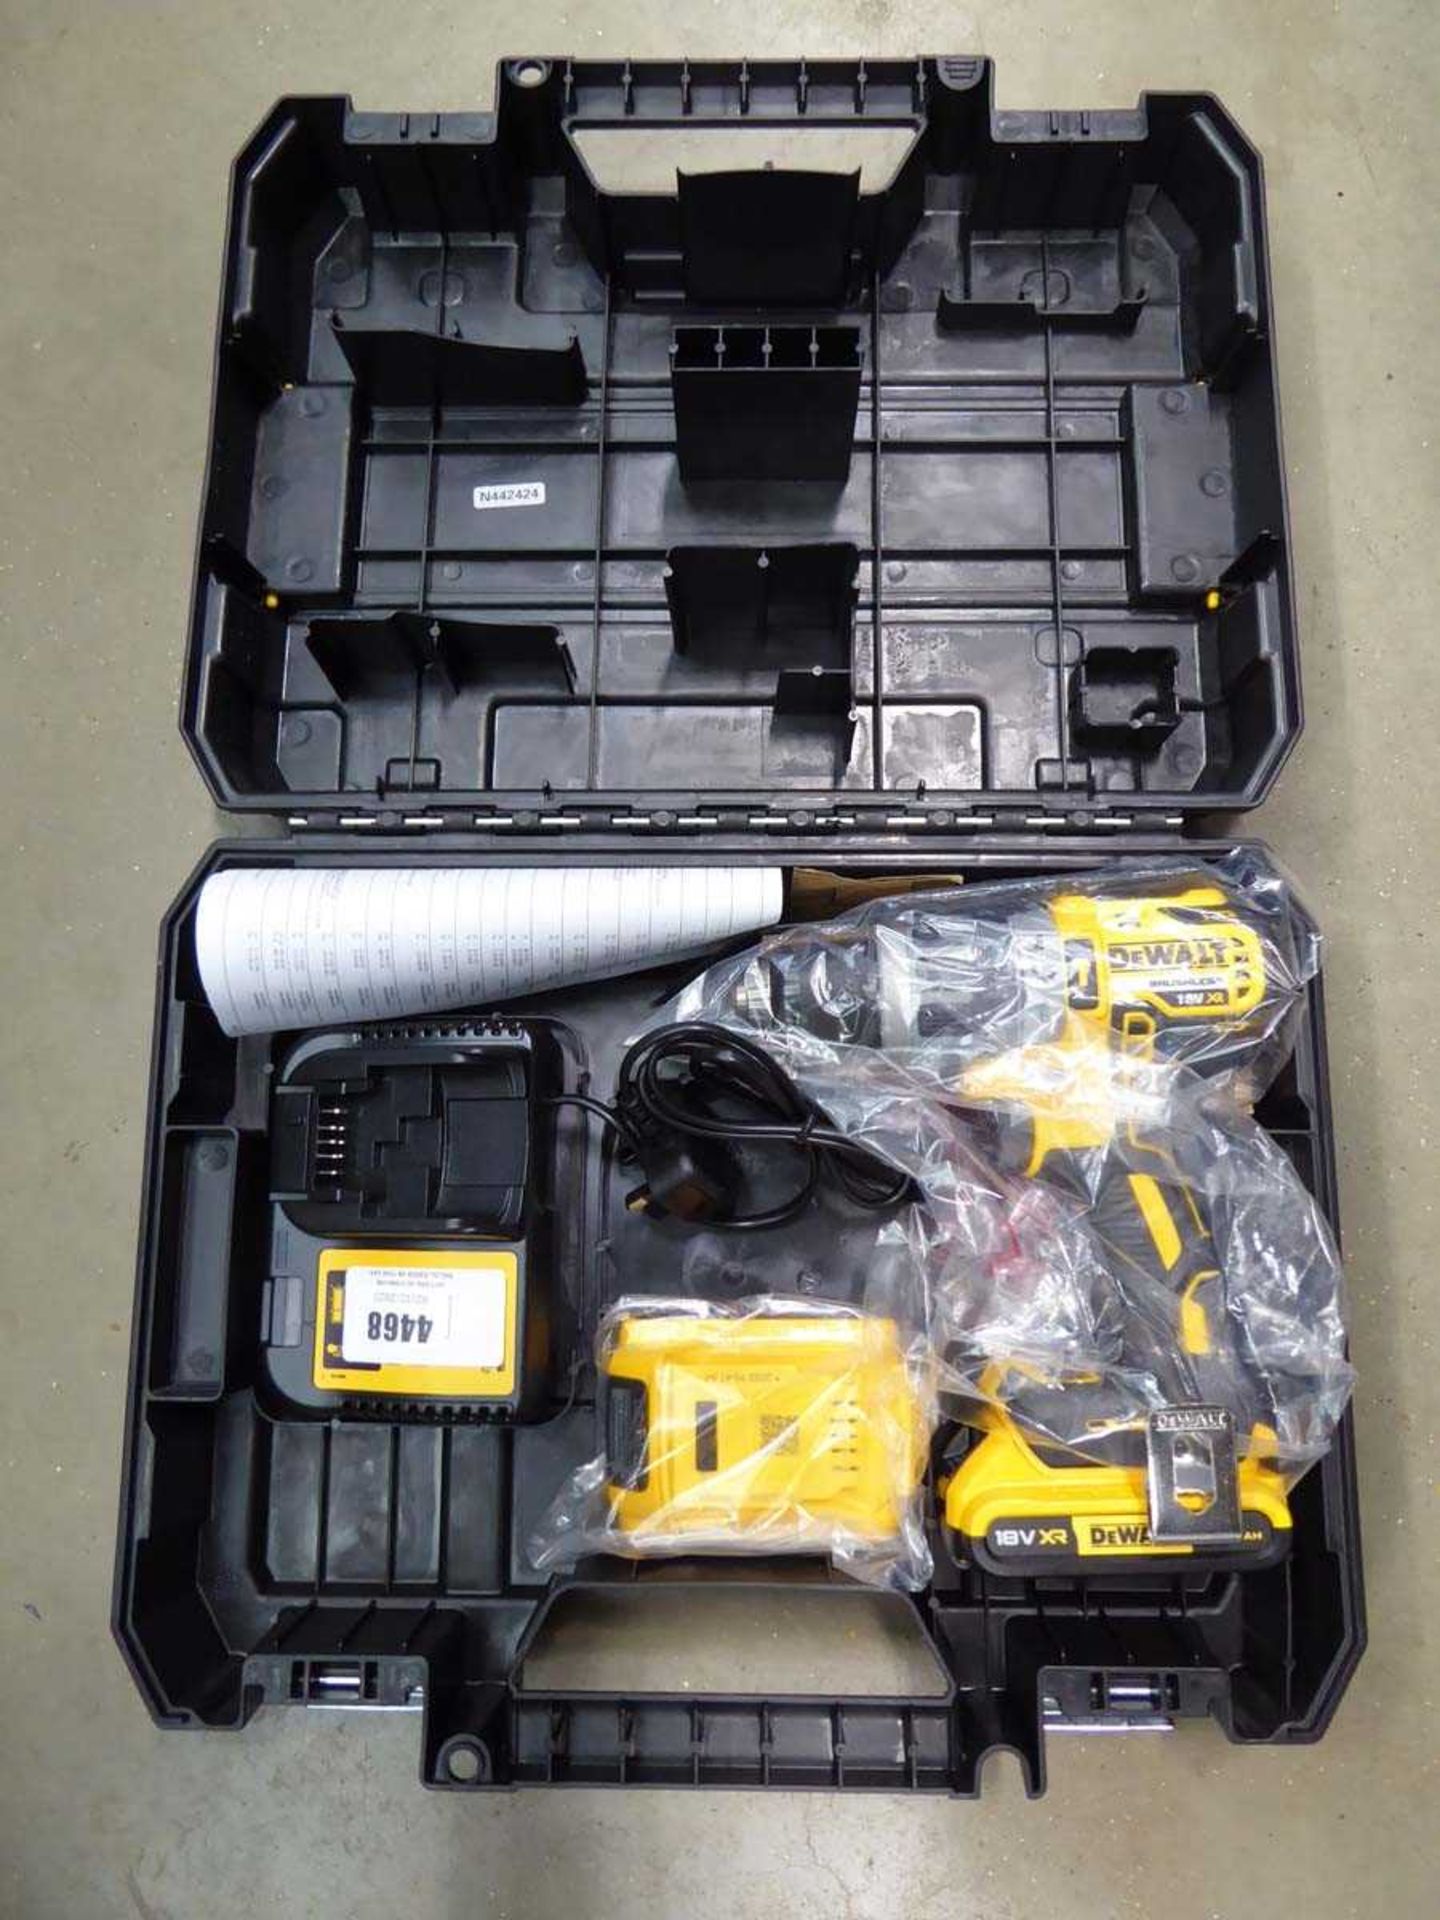 +VAT DeWalt battery drill with 2 batteries and charger